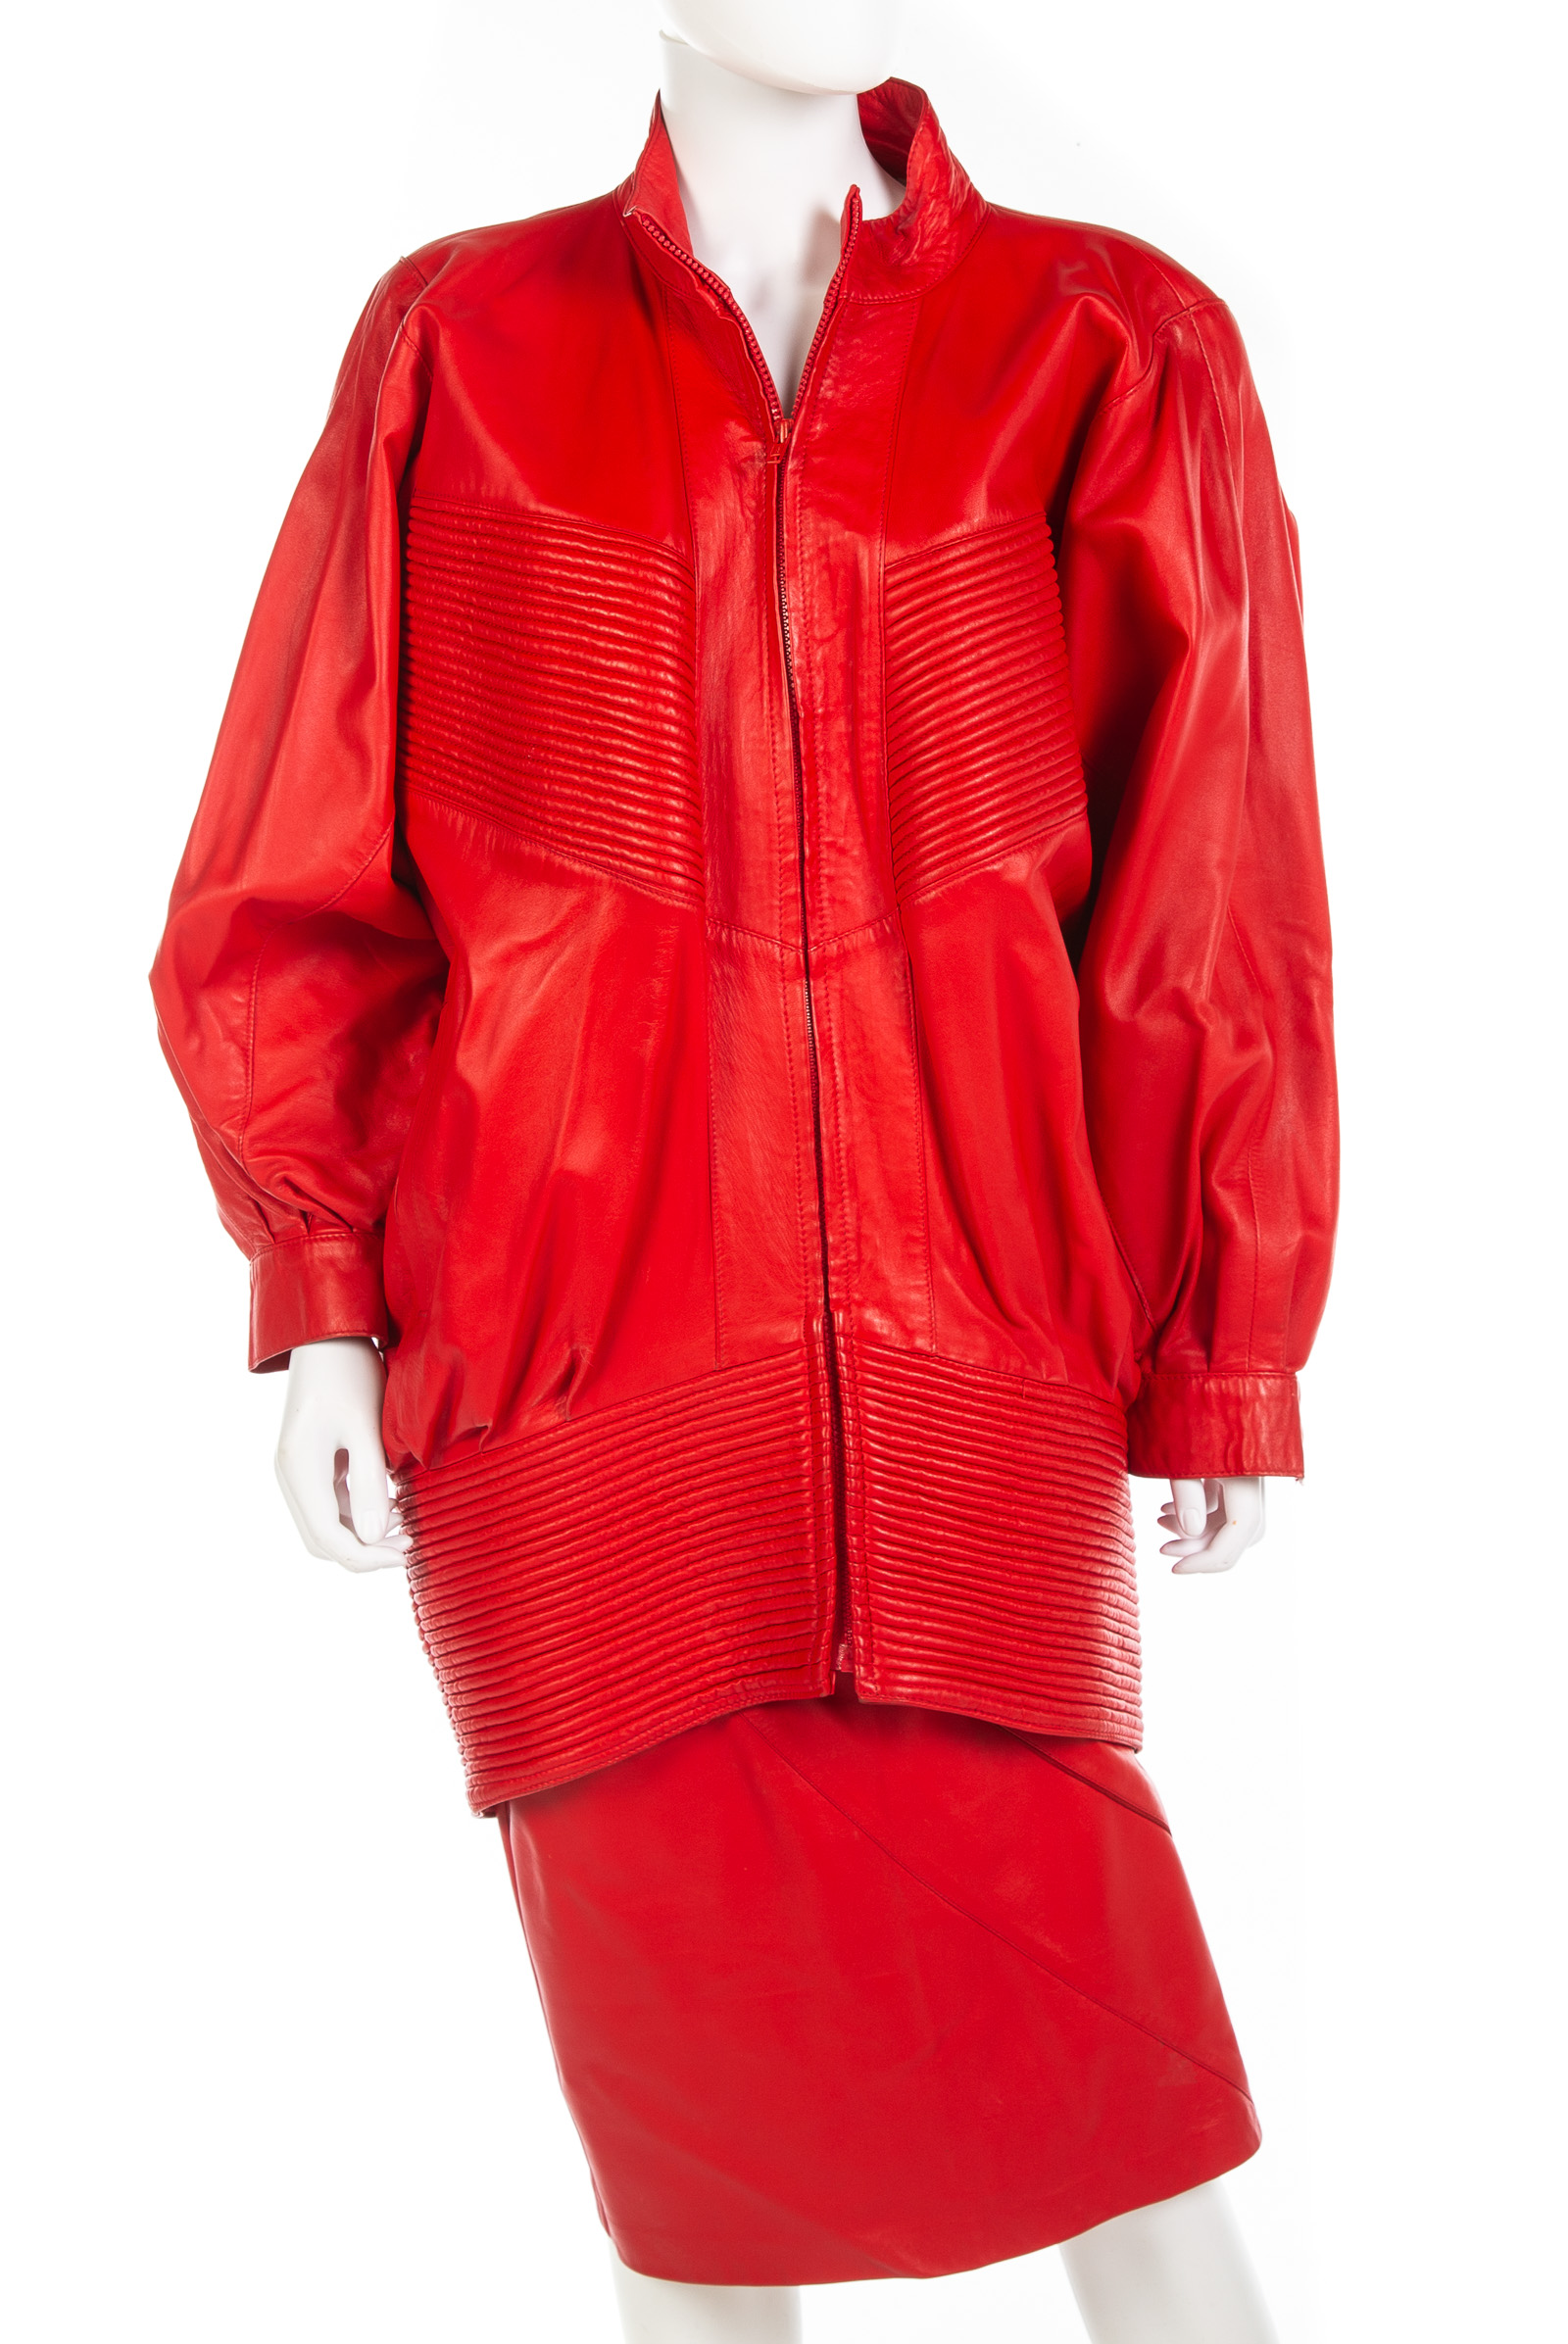 COLLECTION OF RED LEATHER CLOTHING 3372e4